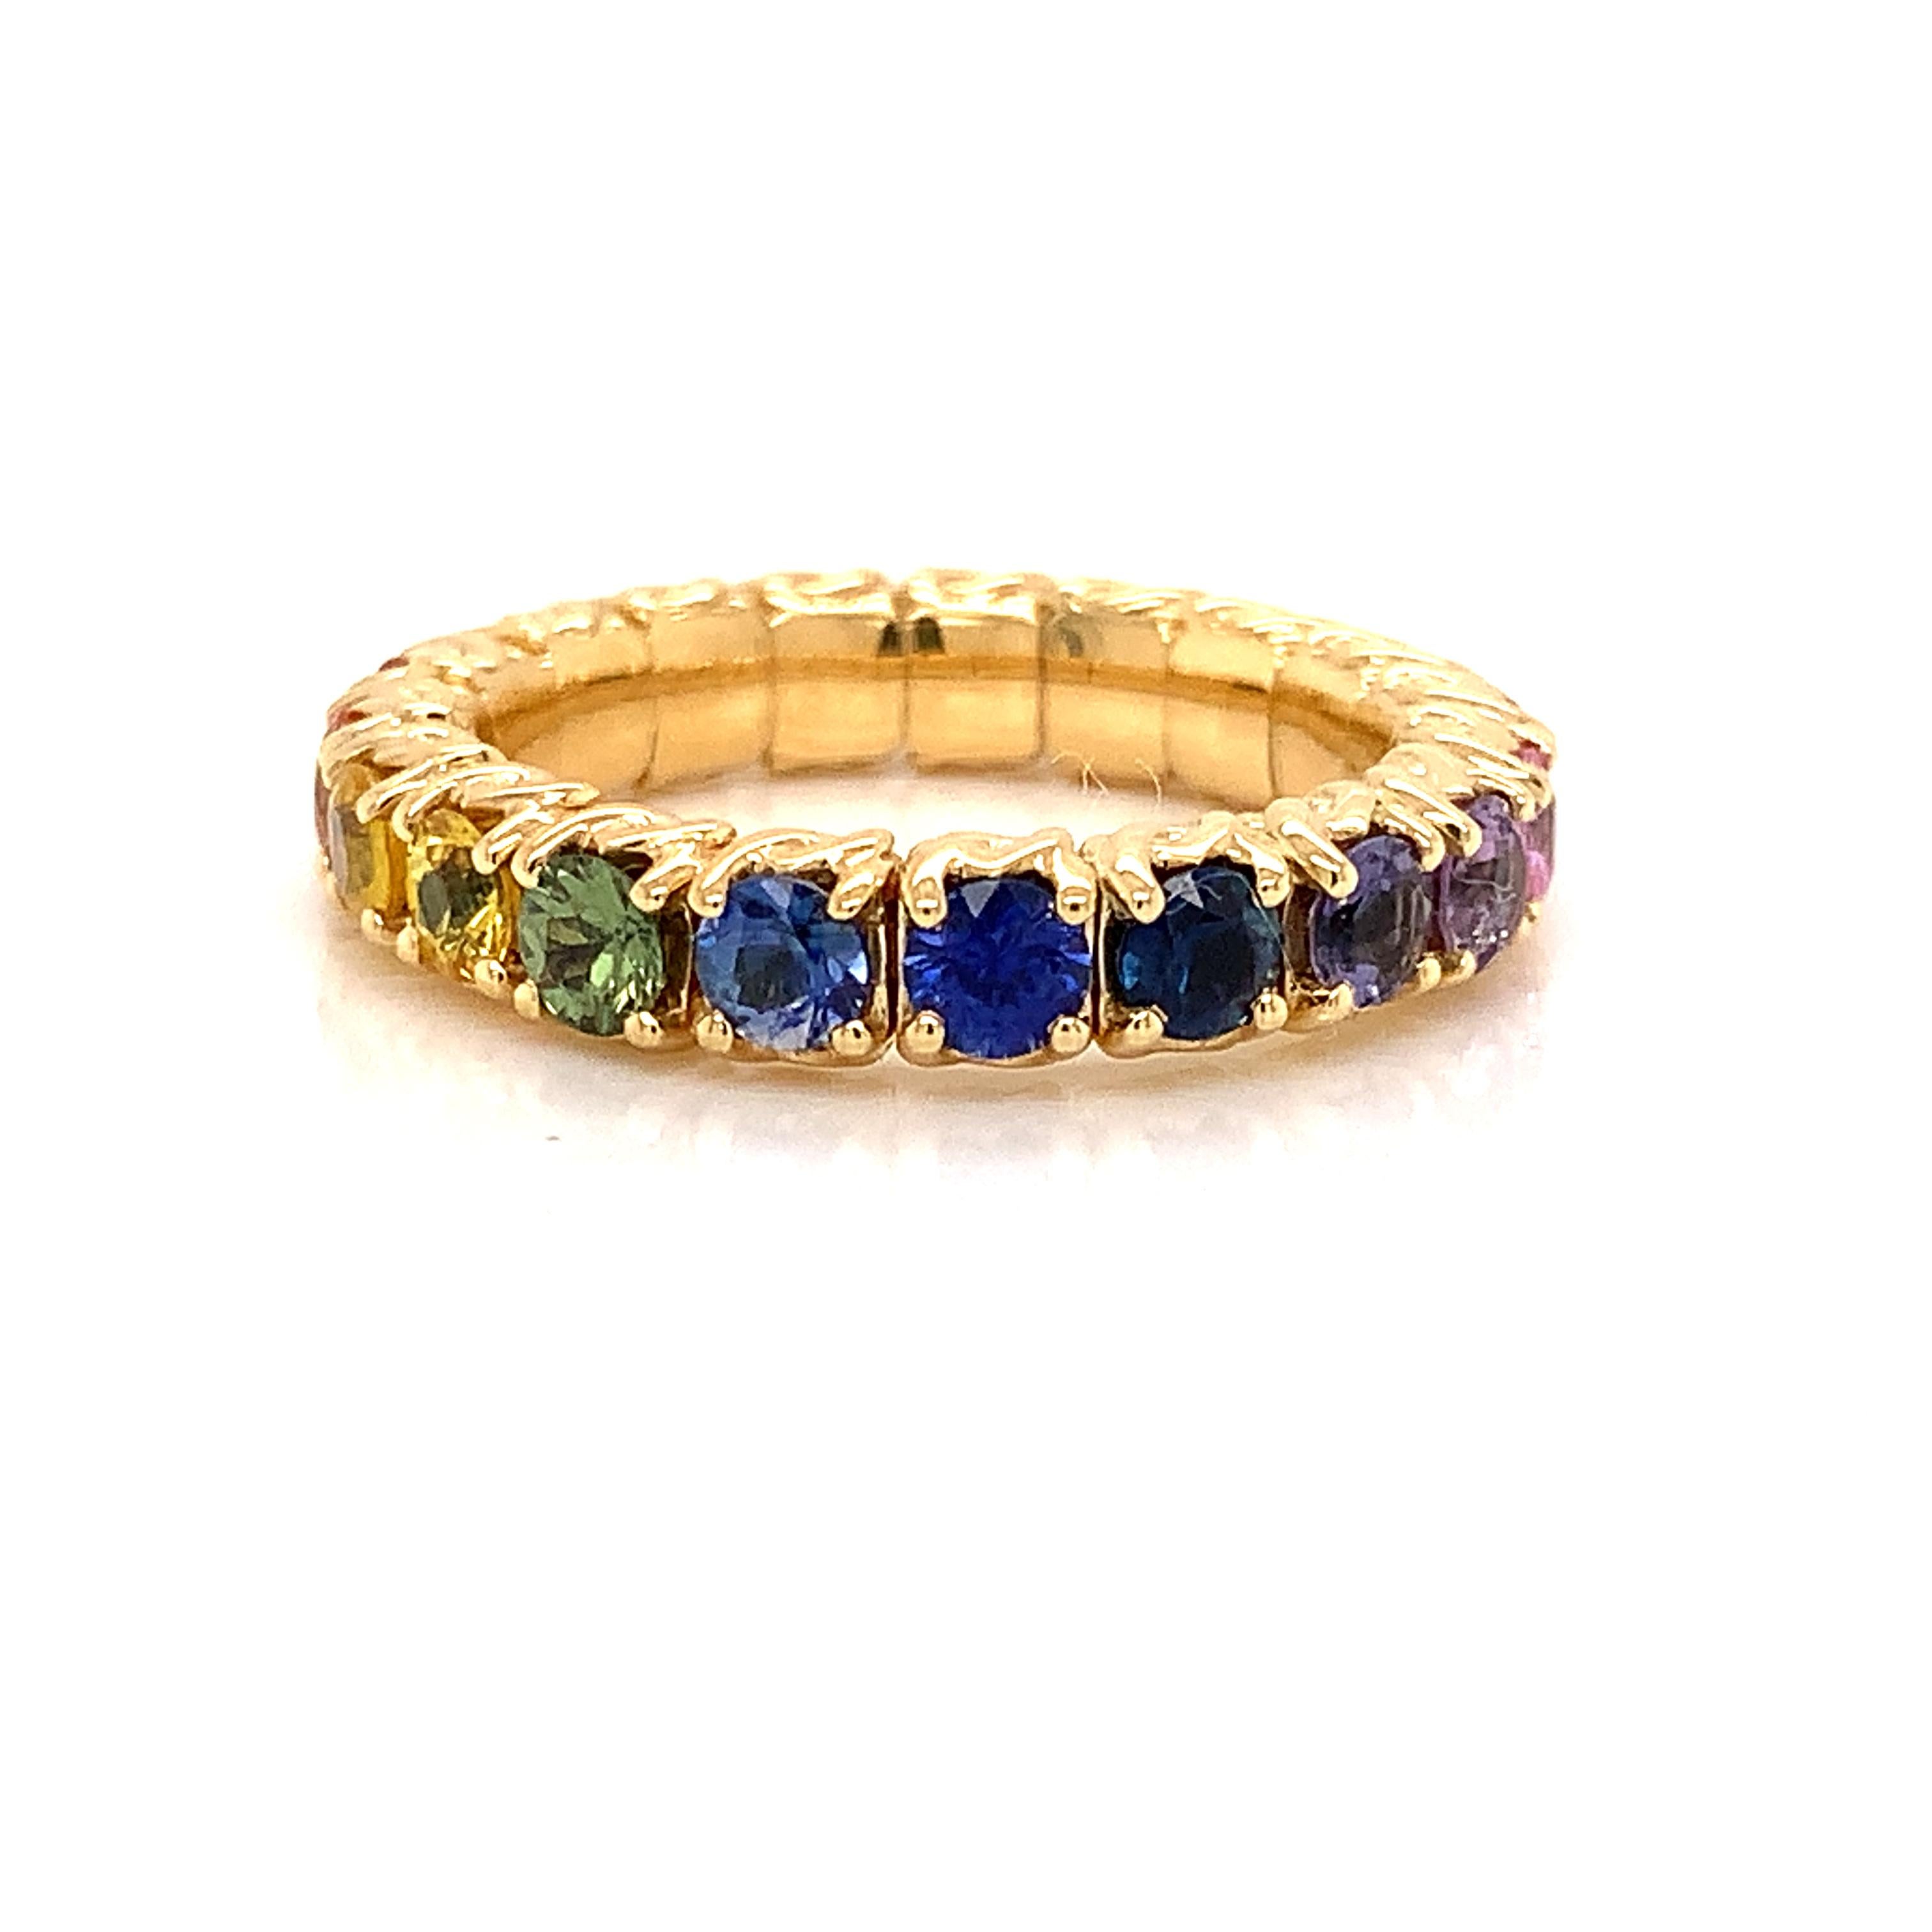 Women's 18 Karat Yellow Gold Stretchy Ring with Multicolor Sapphires